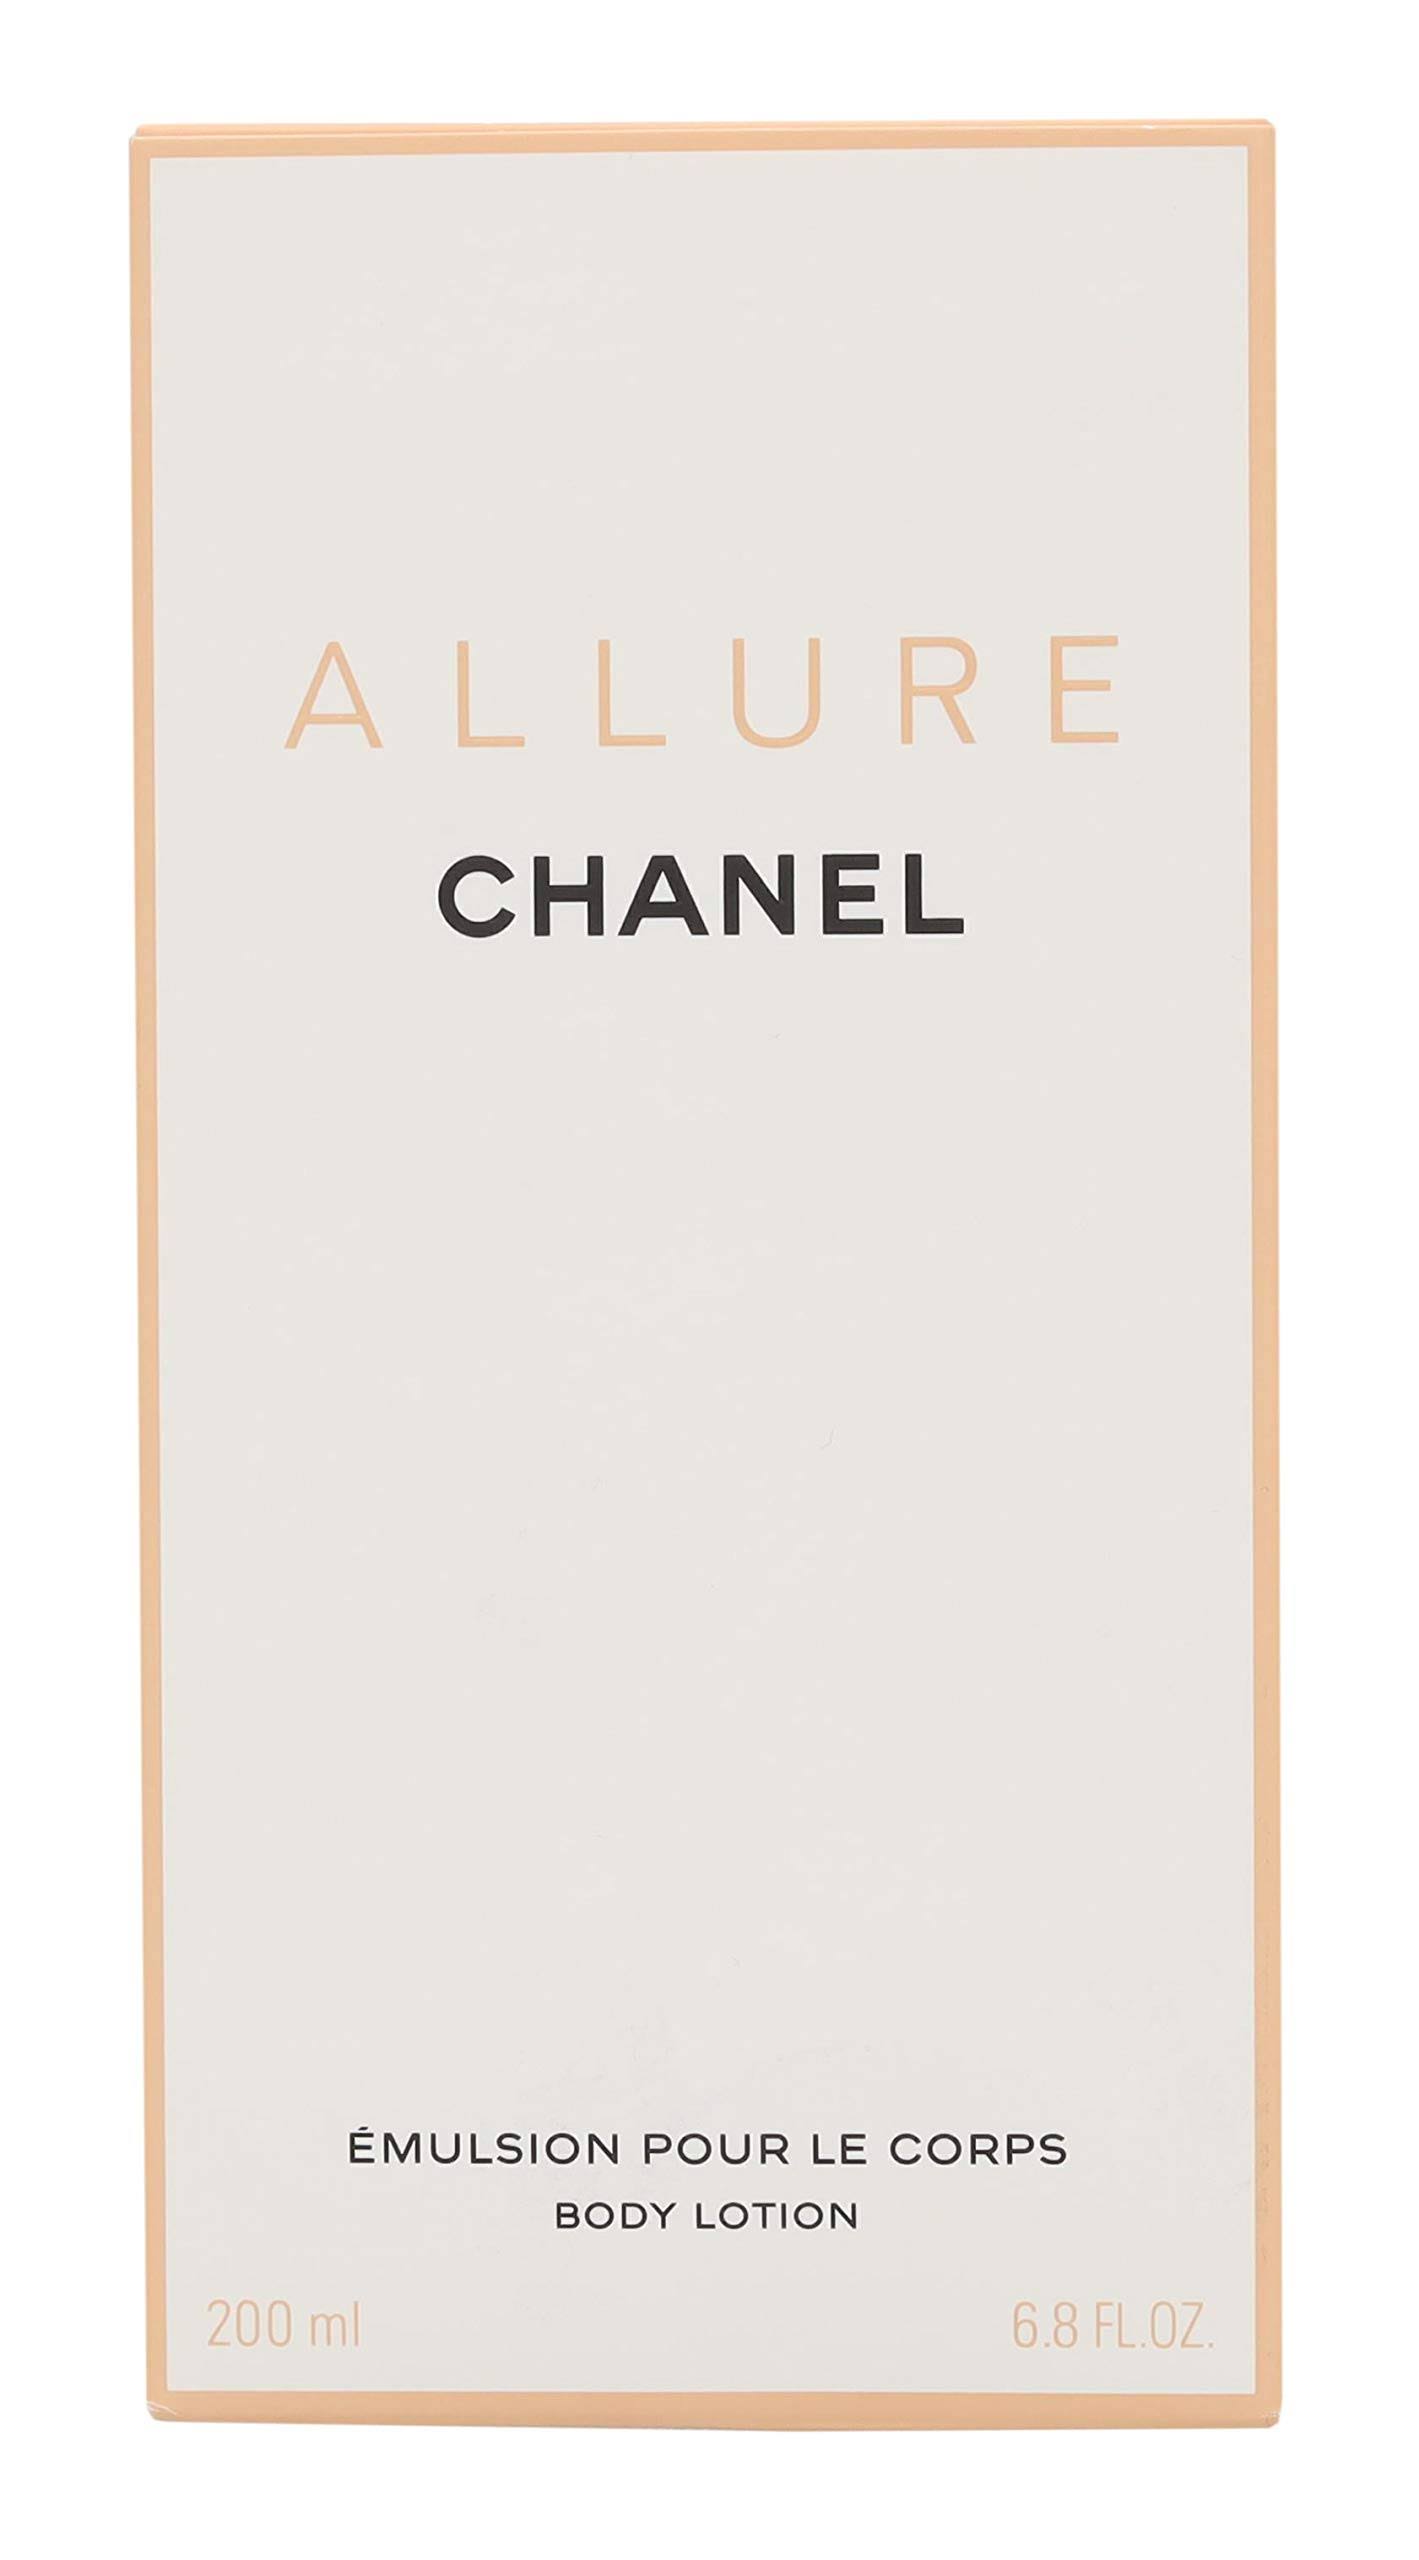 Veale's Allcare Pharmacy - Chanel Allure Body Lotion